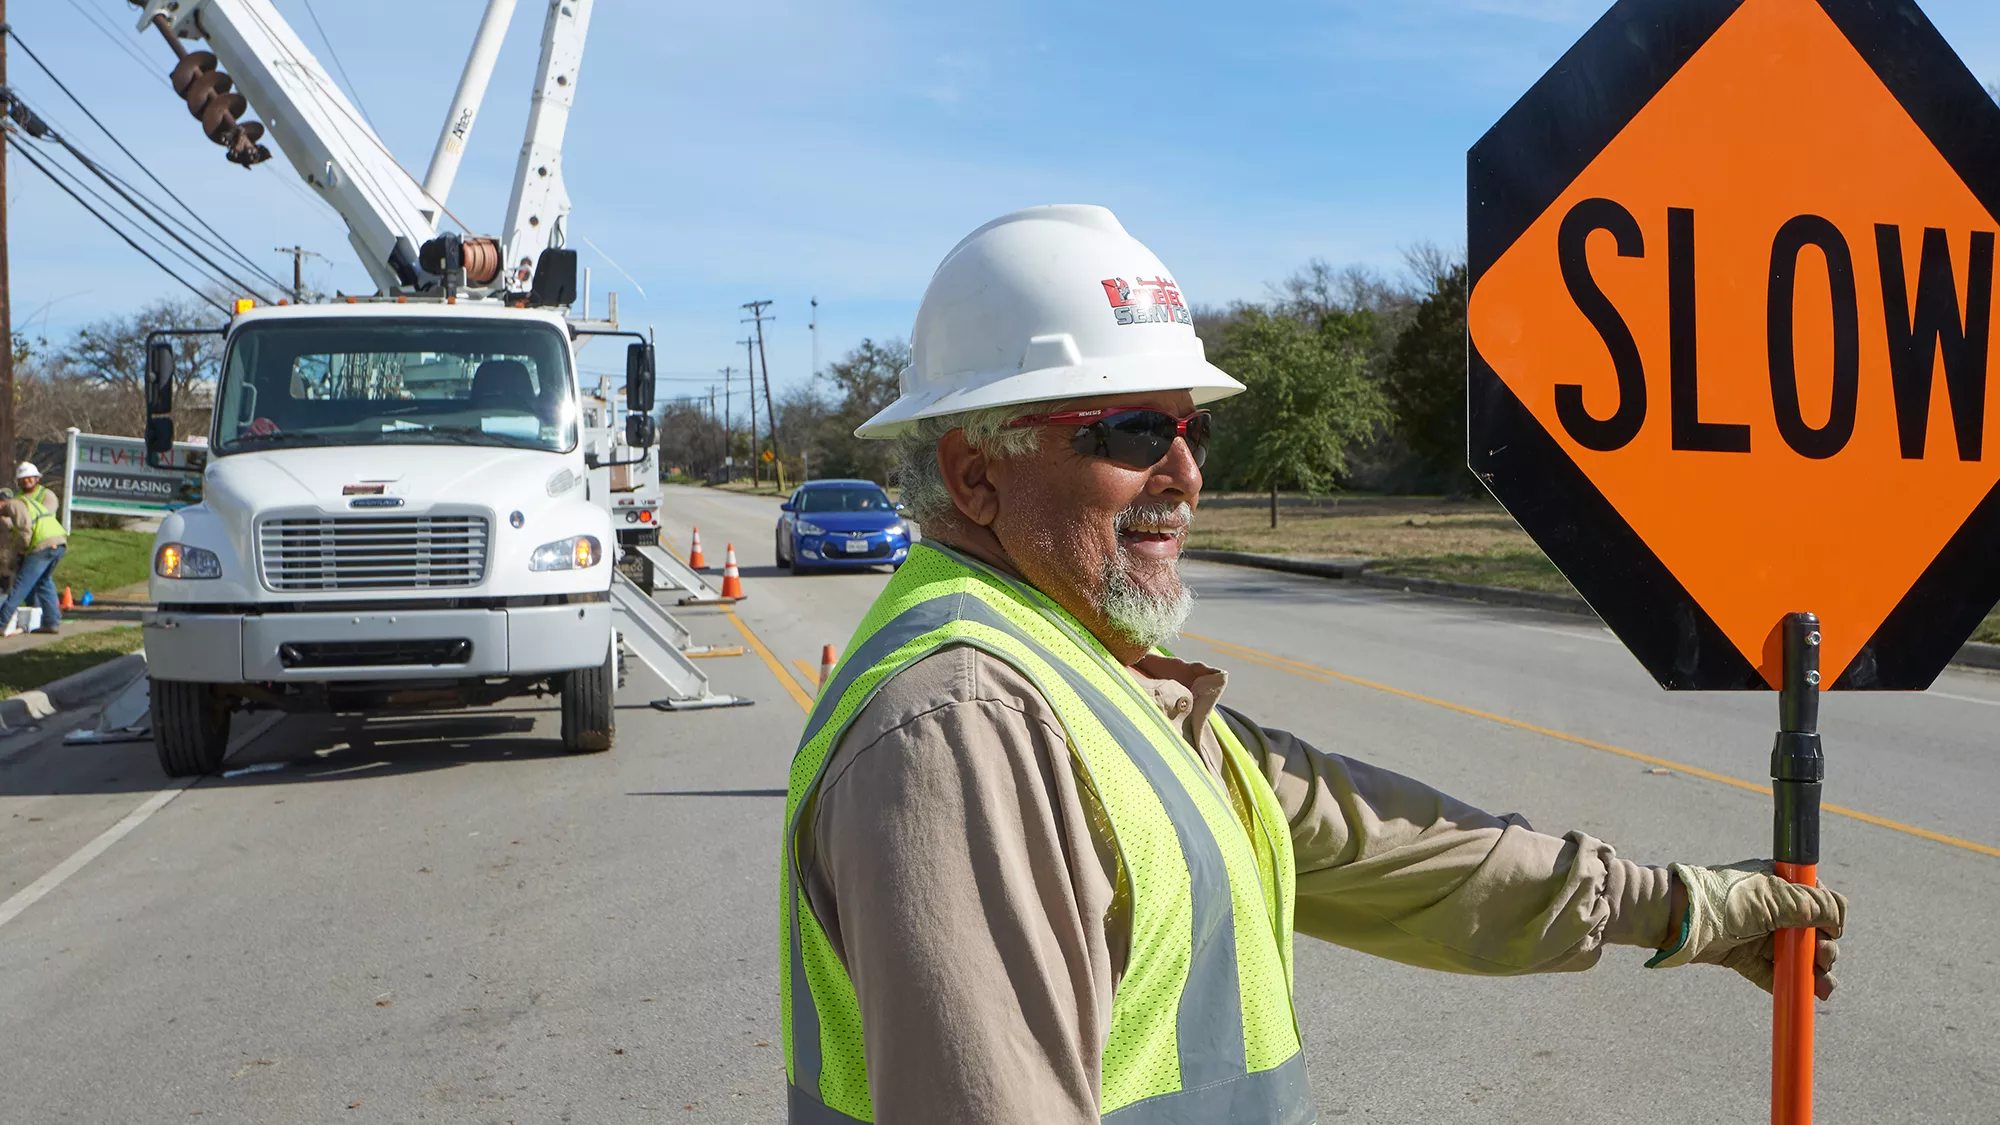 A smiling man in a Linetec hard hat holds a slow traffic sign on the road.